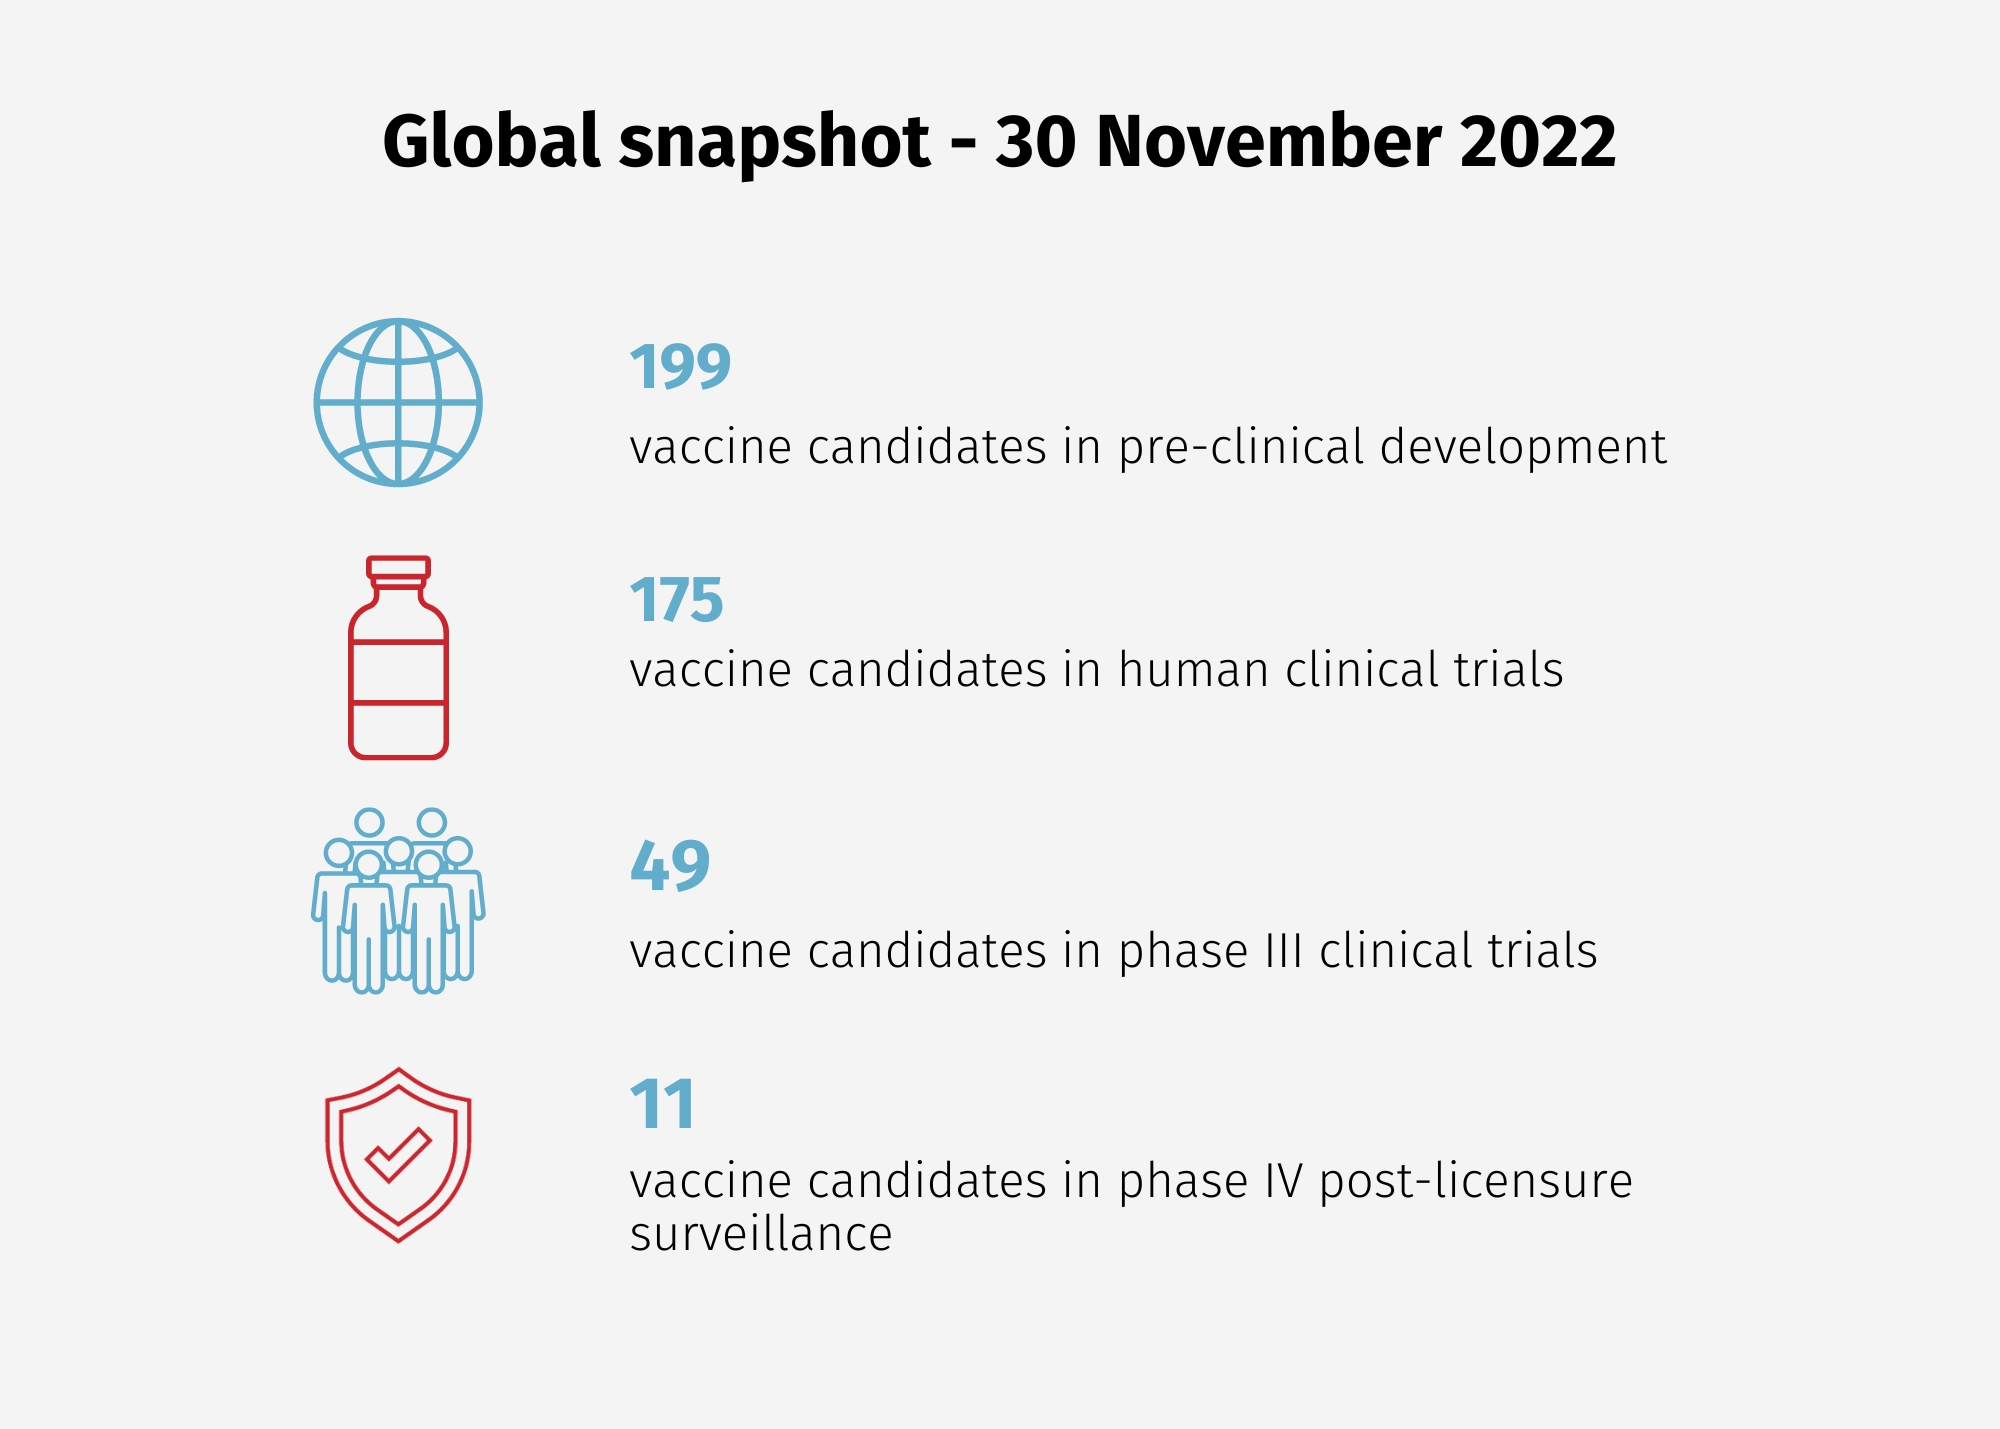 Global snapshot as at 30 November 2022. 199 vaccine candidates in pre-clinical development. 175 vaccine candidates in human clinical trials. 49 vaccine candidates in phase III clinical trials. 11 vaccine candidates in phase IV post-licensure surveillance.